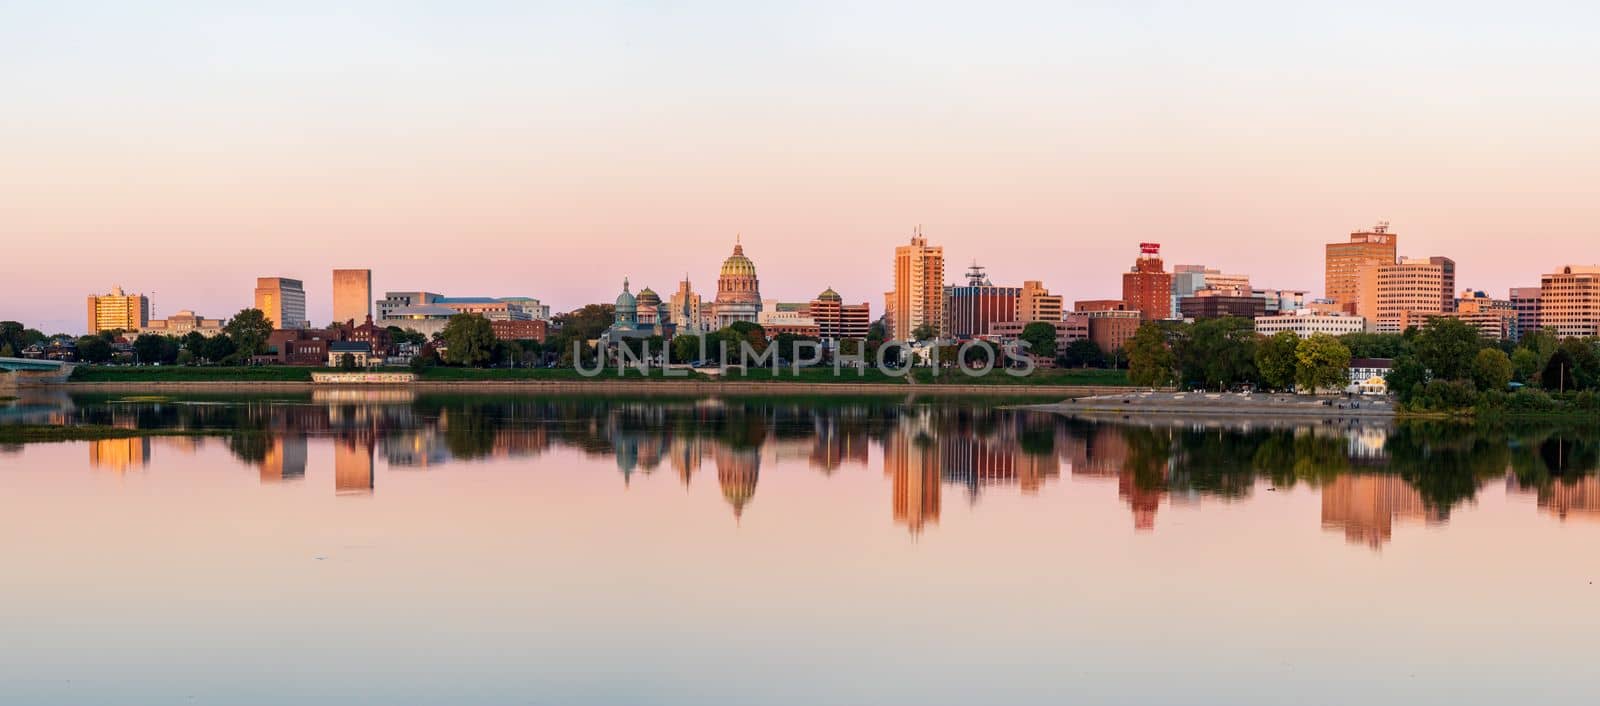 Harrisburg, PA - 9 October 2022: Panorama of the cityscape of Harrisburg in Pennsylvania